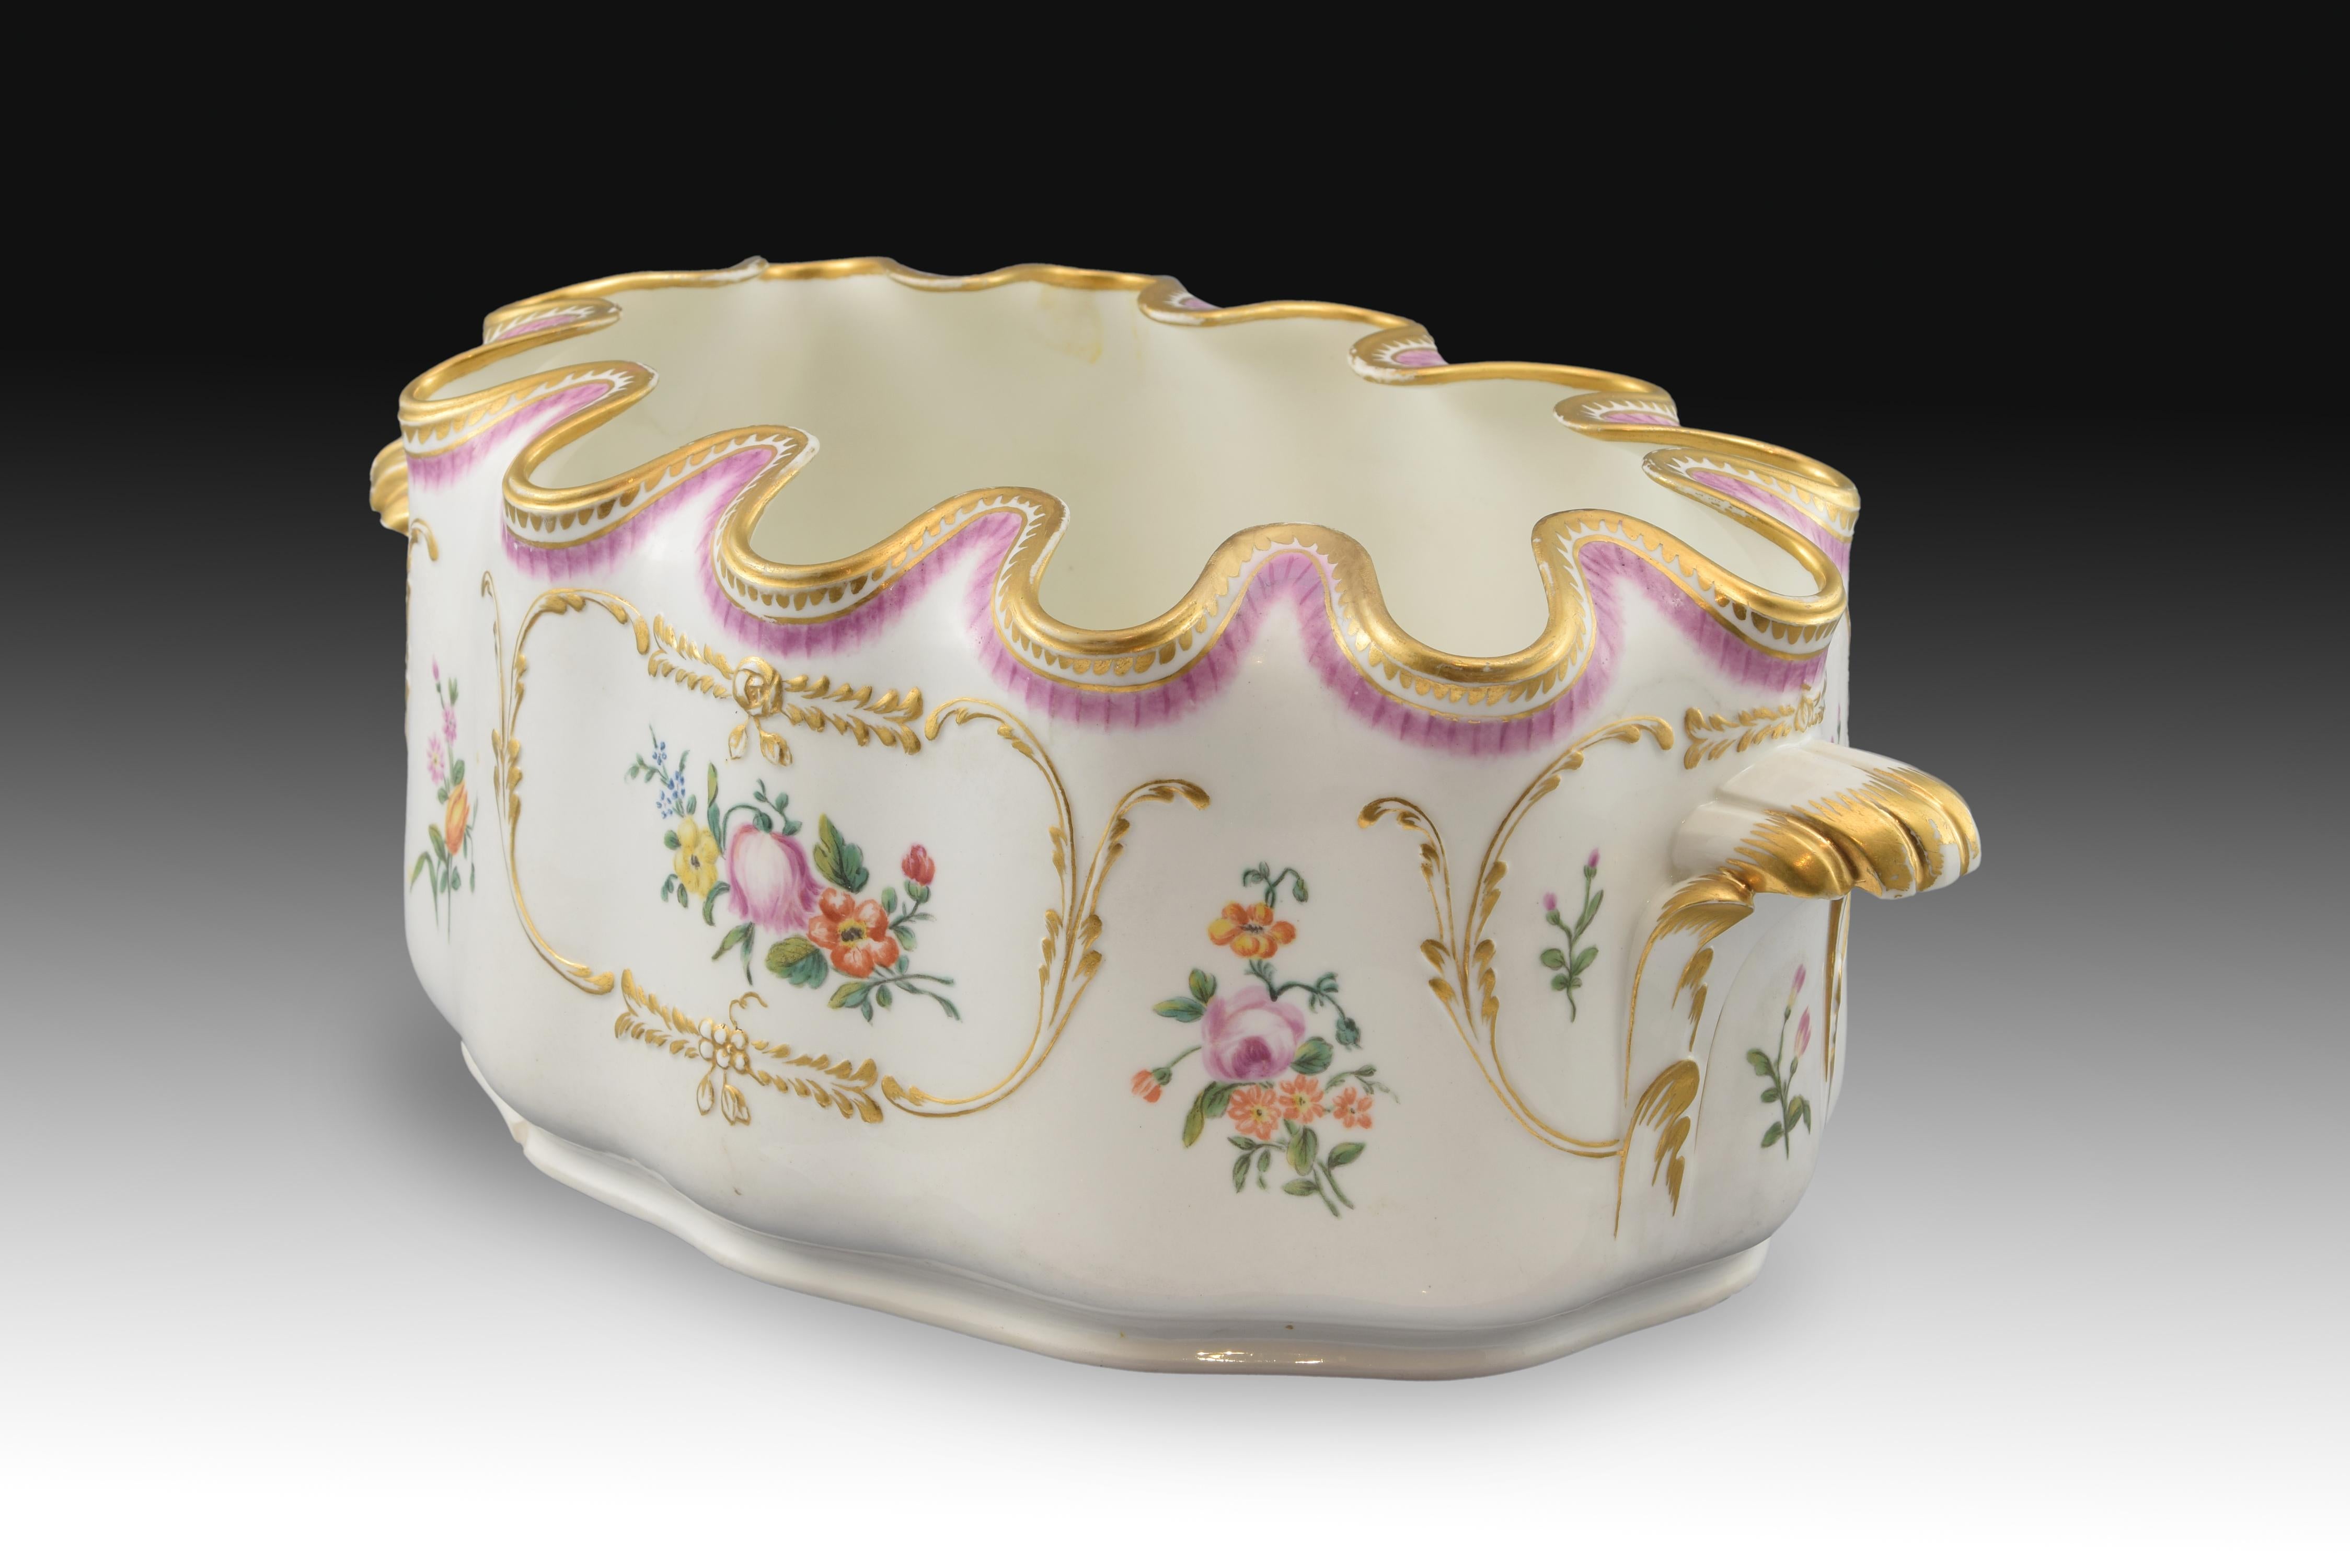 Soft white paste, circa 1784-1803.
Piece of tender pasta with wavy edges used to hold the tops of the cups in them and cool them when filling the ice container or similar. On the outside, it has two handles in the shape of plant elements and small